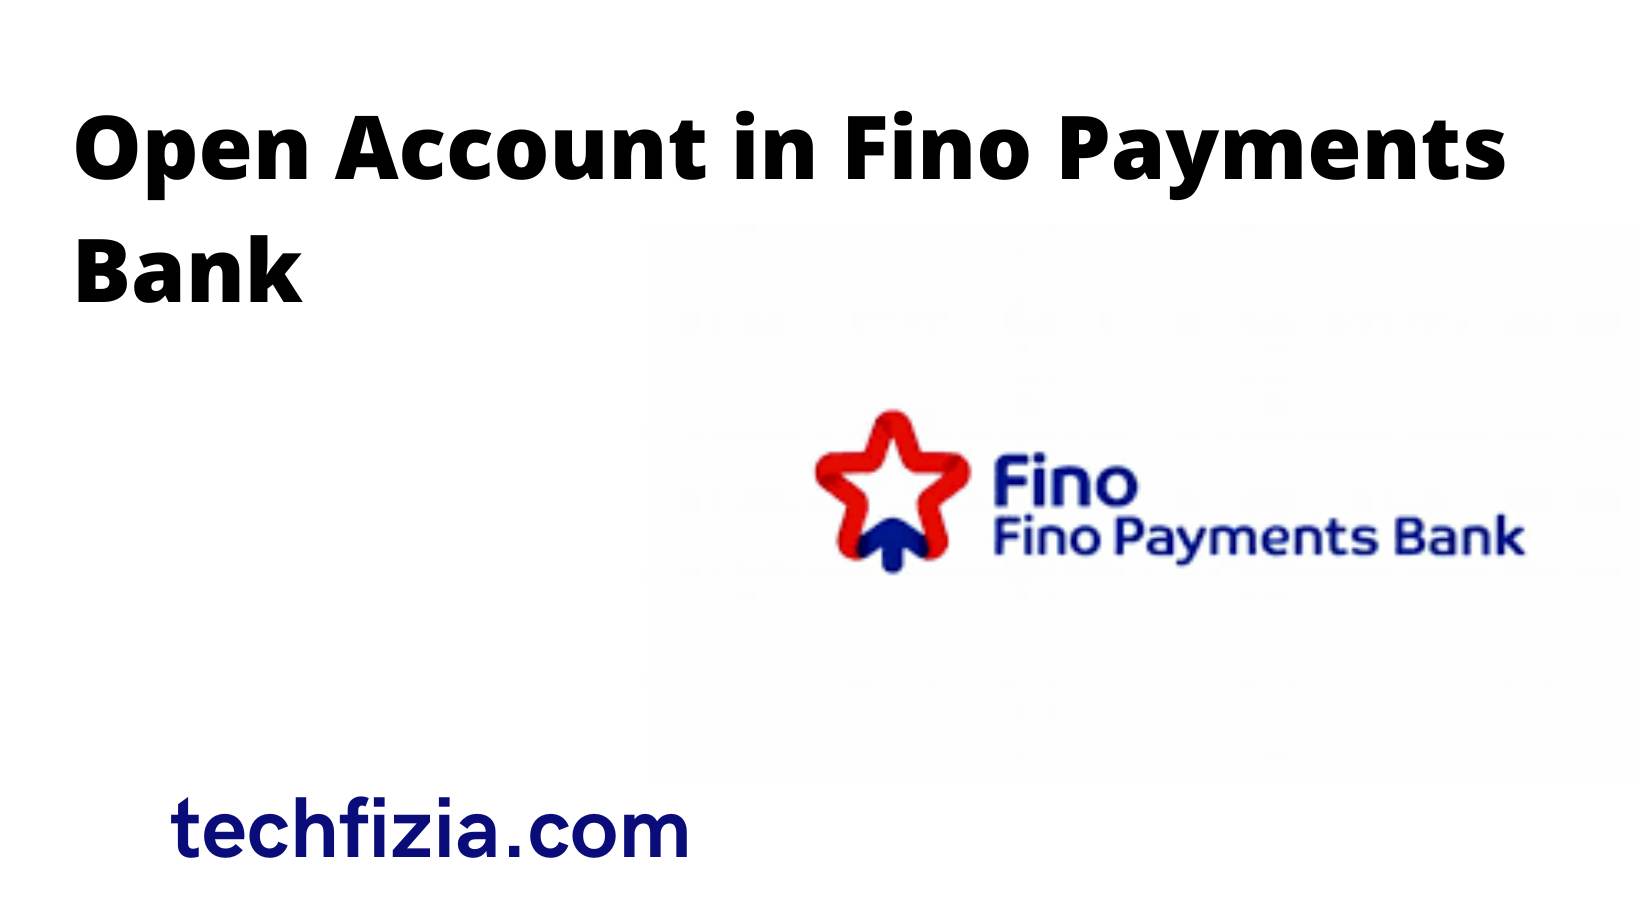 Open Account in Fino Payments Bank